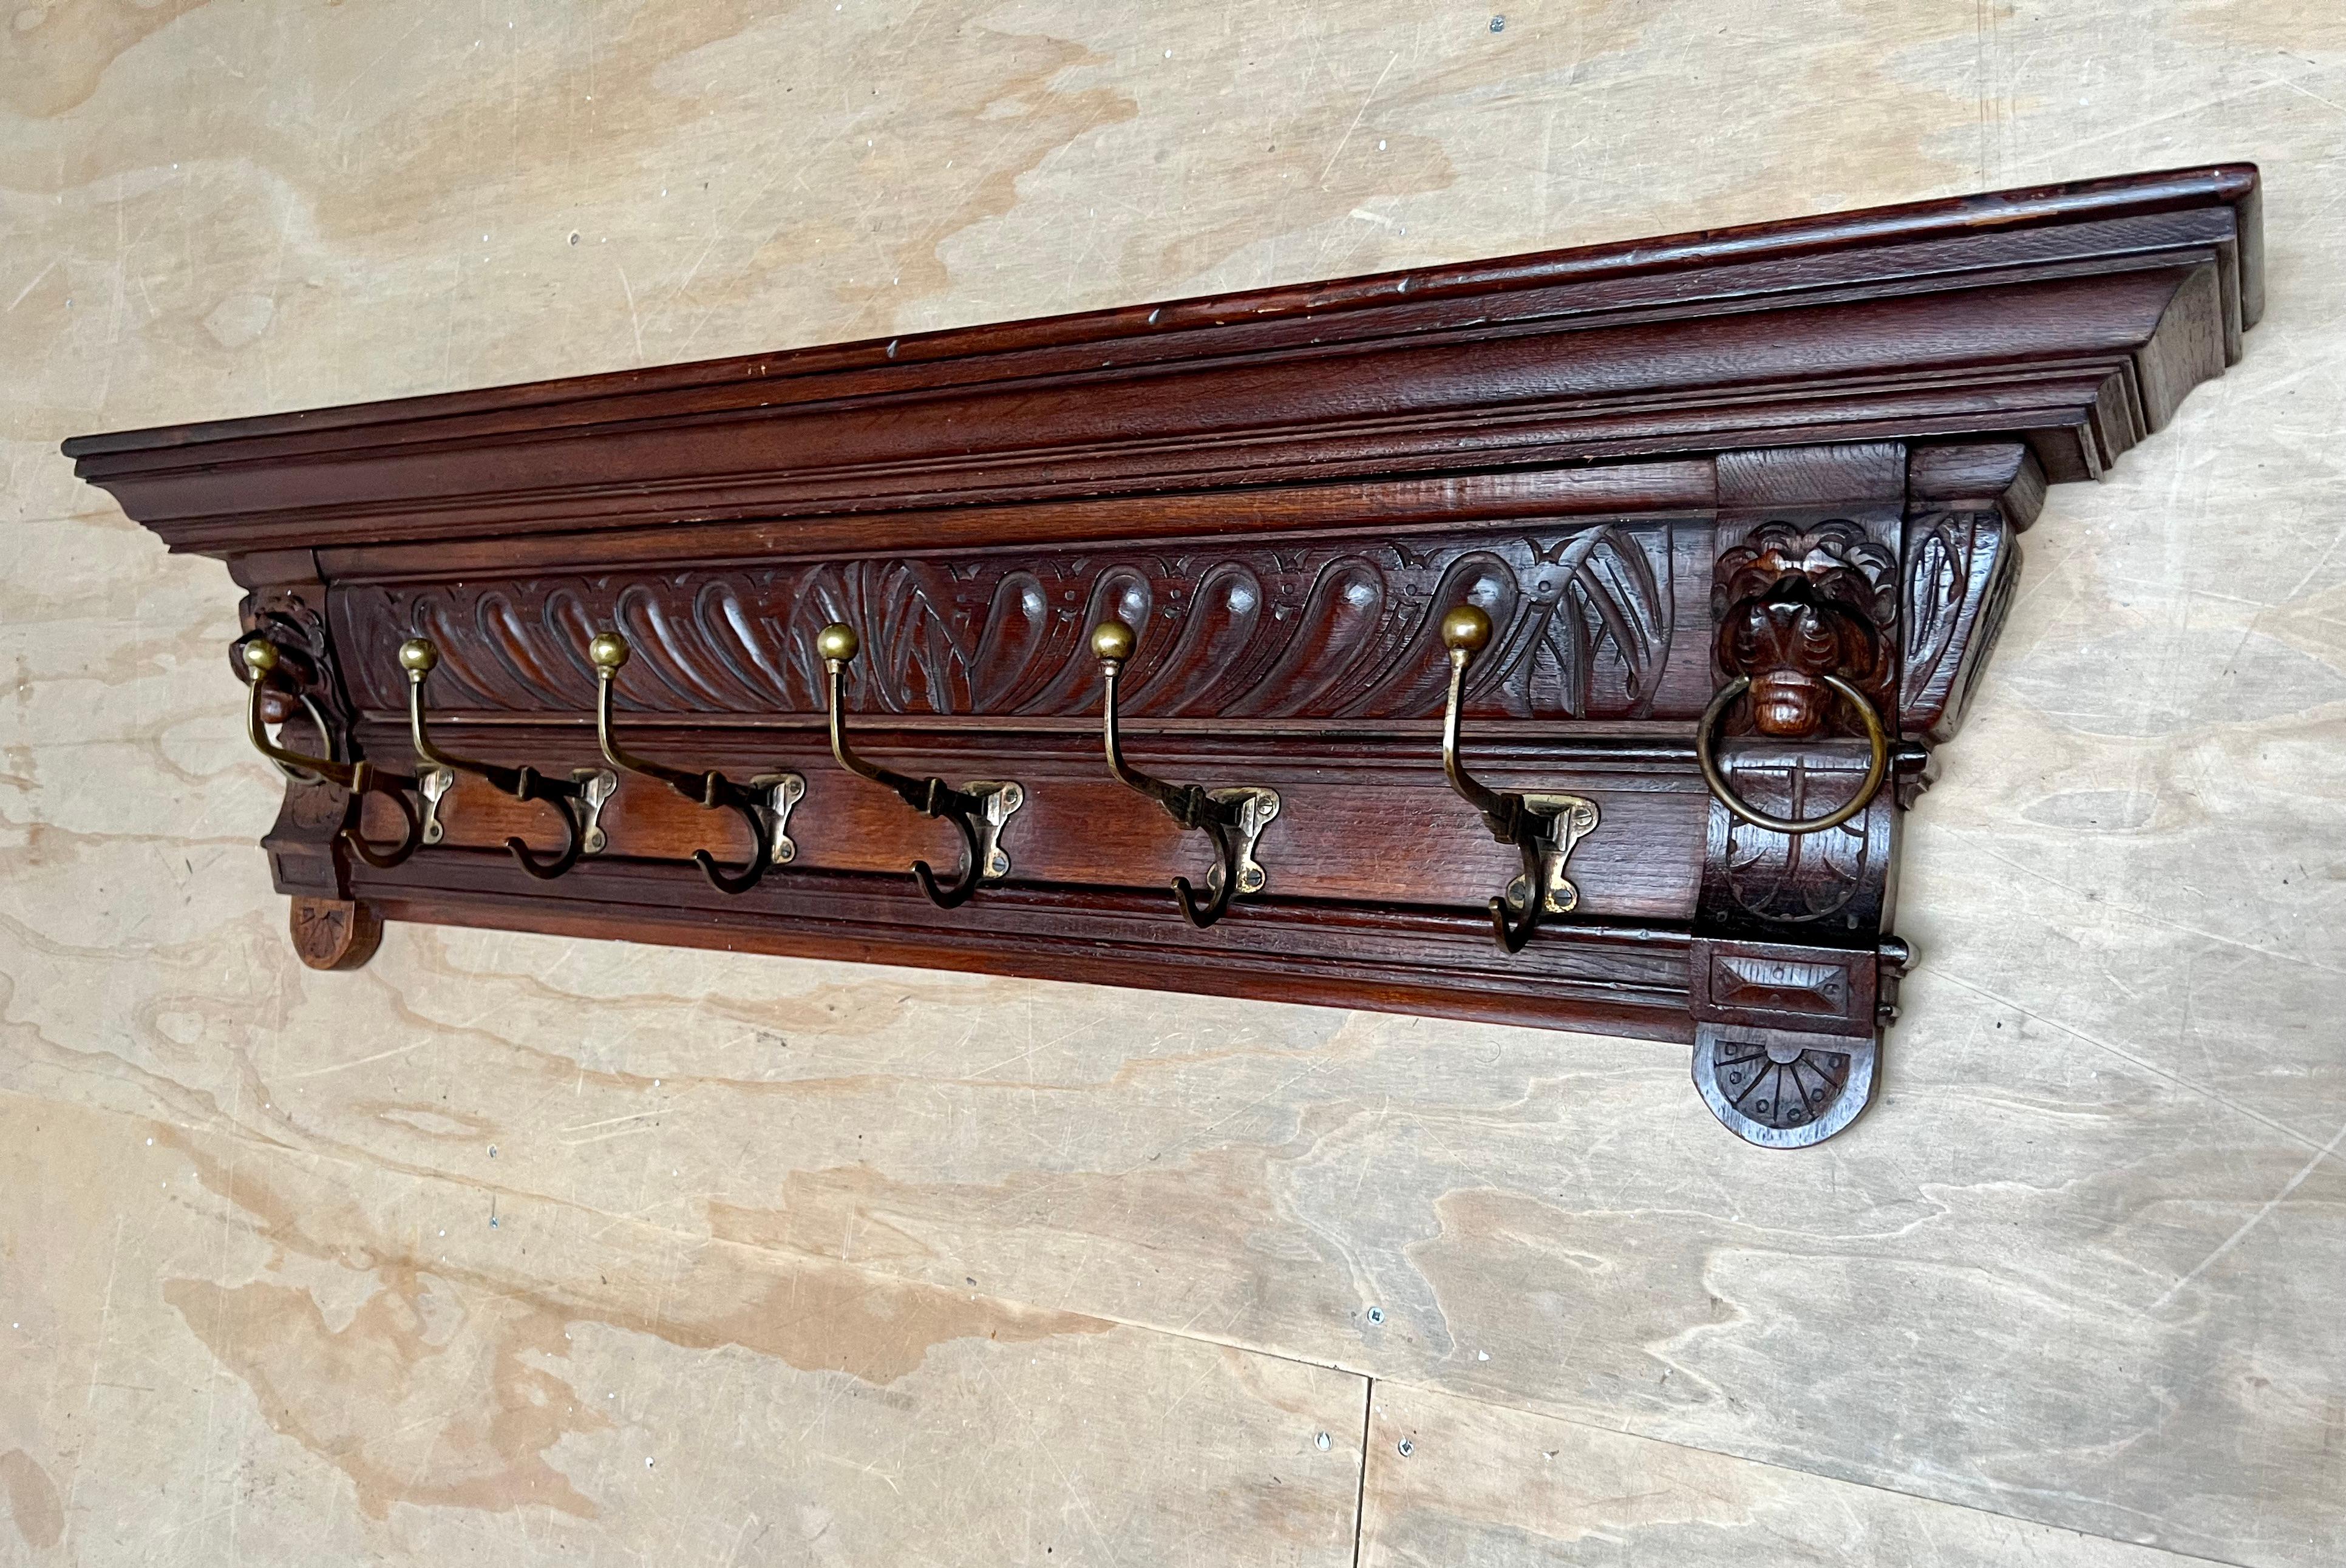 Very well sculptural coat rack with stylish and sturdy bronze hooks.

This antique and practical size antique Dutch coat rack is special and desirable for a number of reasons. First of all, it is very well carved and with great depth. Secondly, this